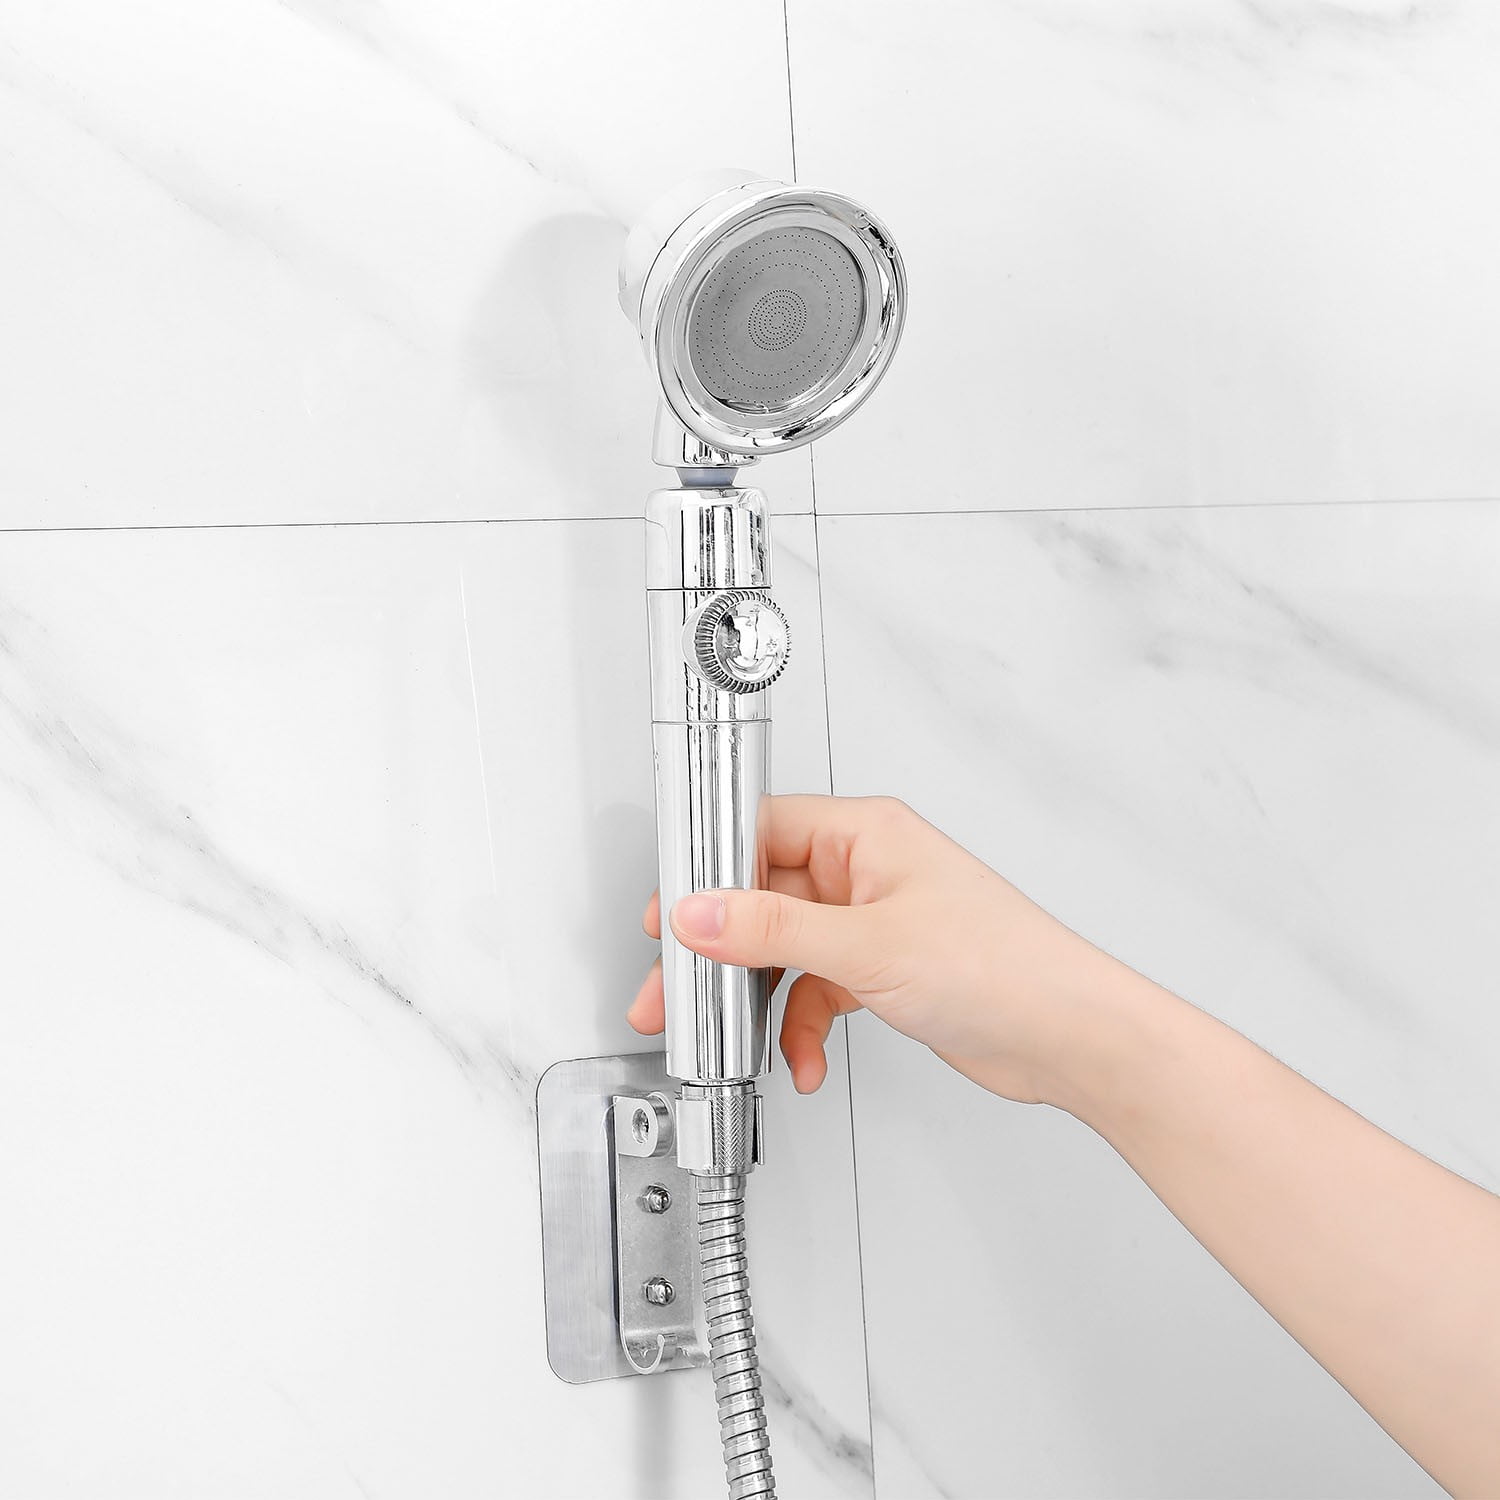 Details about   The Eco-Water SPA Saving 4 Modes With Pause Button Function Spray Handle Shower 